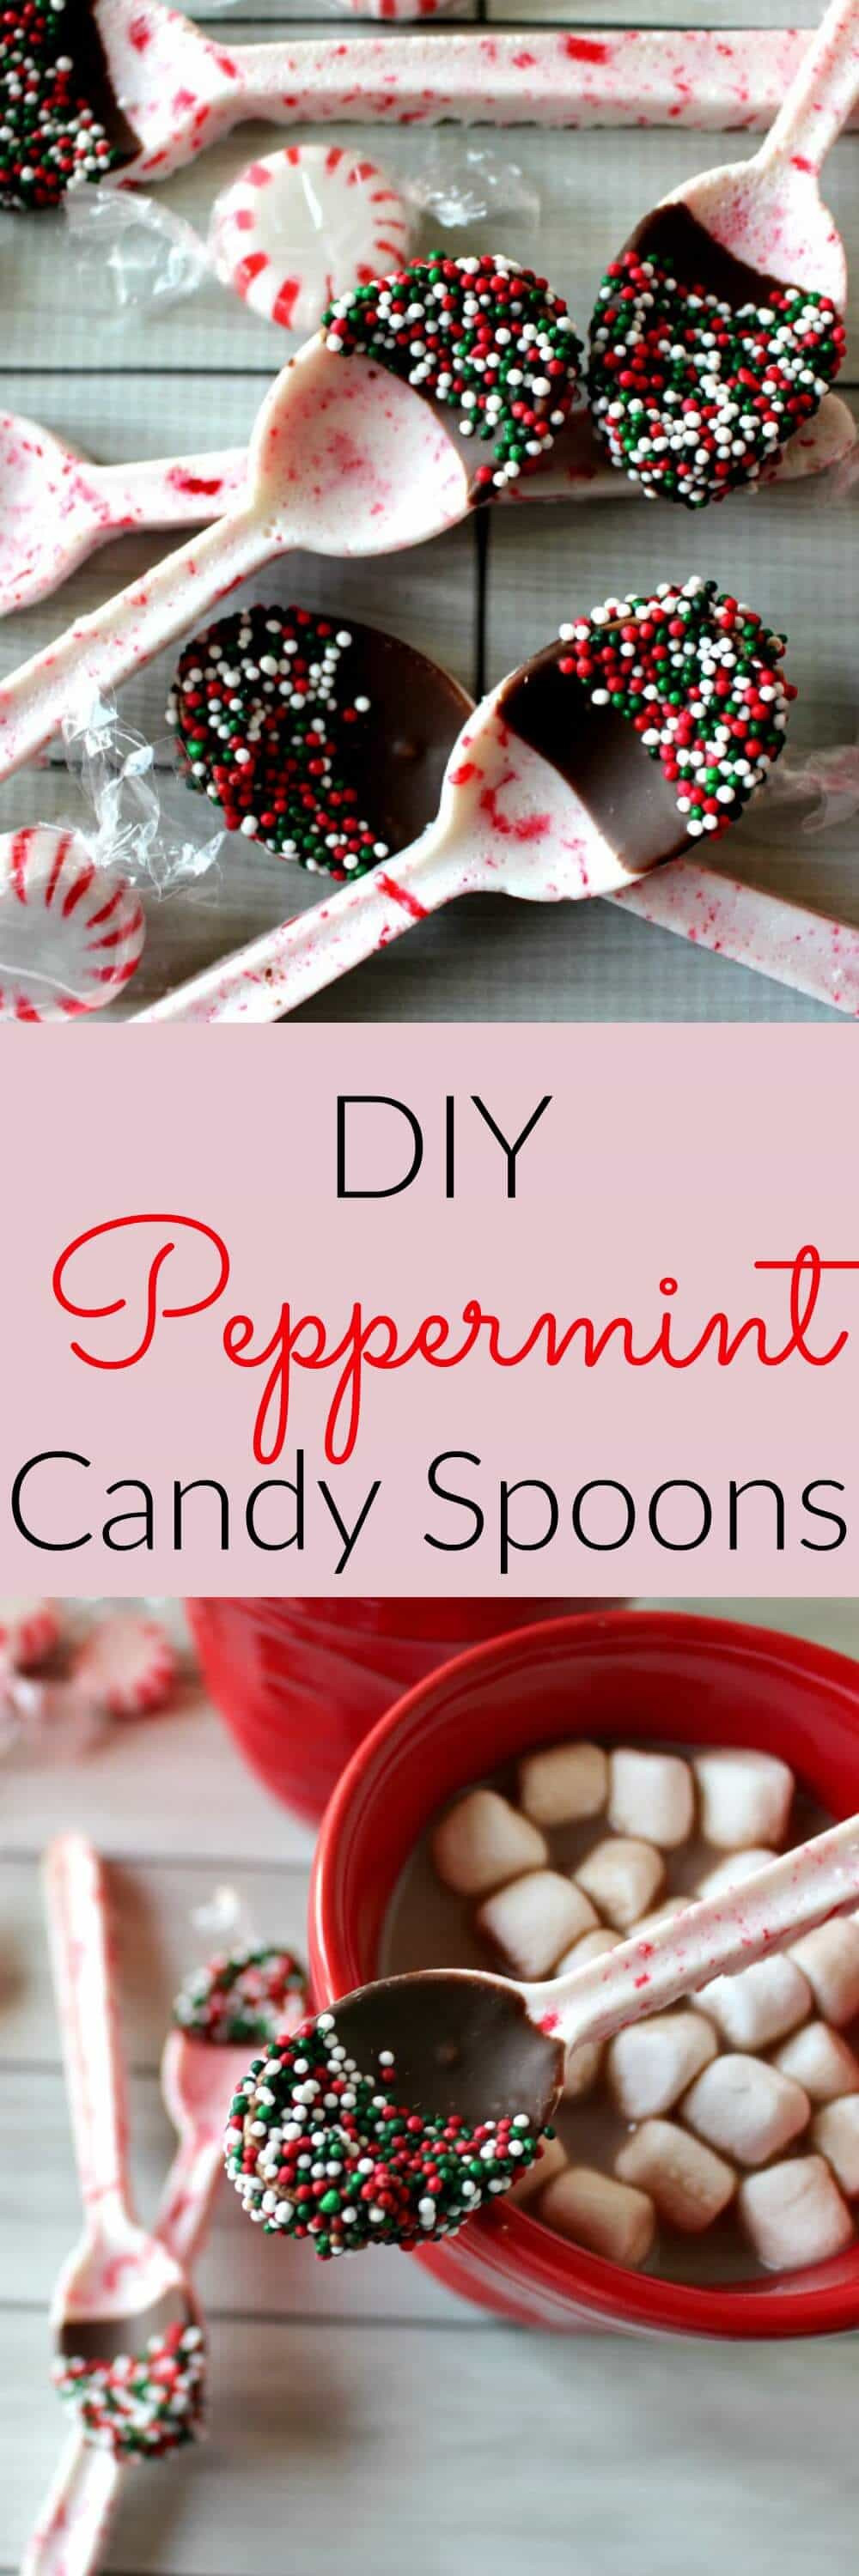 DIY Christmas Candy Gifts
 DIY Peppermint Candy Spoons Princess Pinky Girl